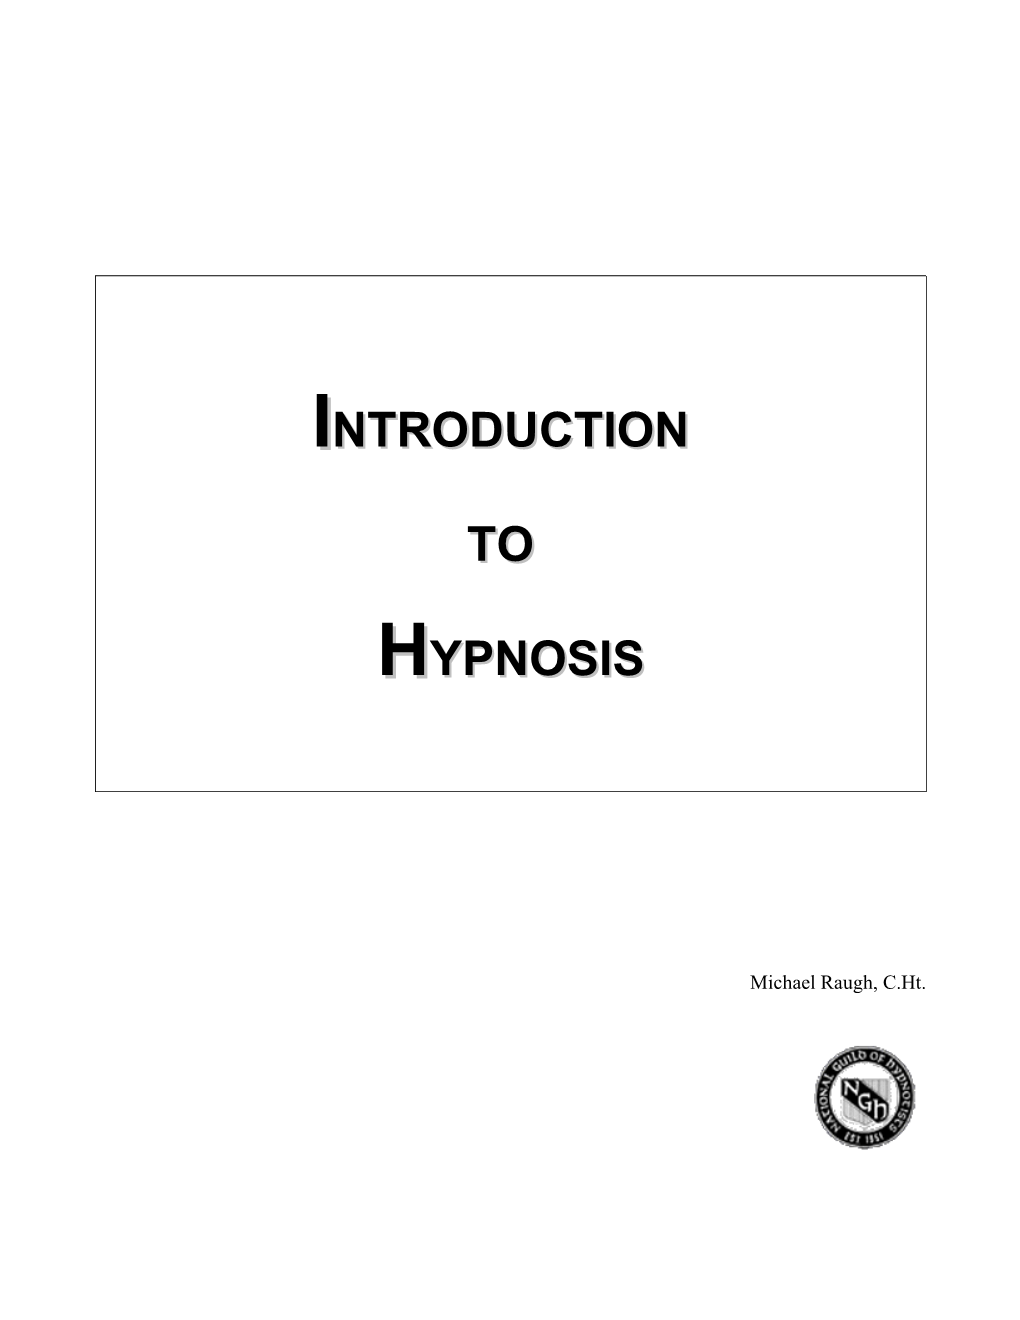 Introduction to Hypnosis